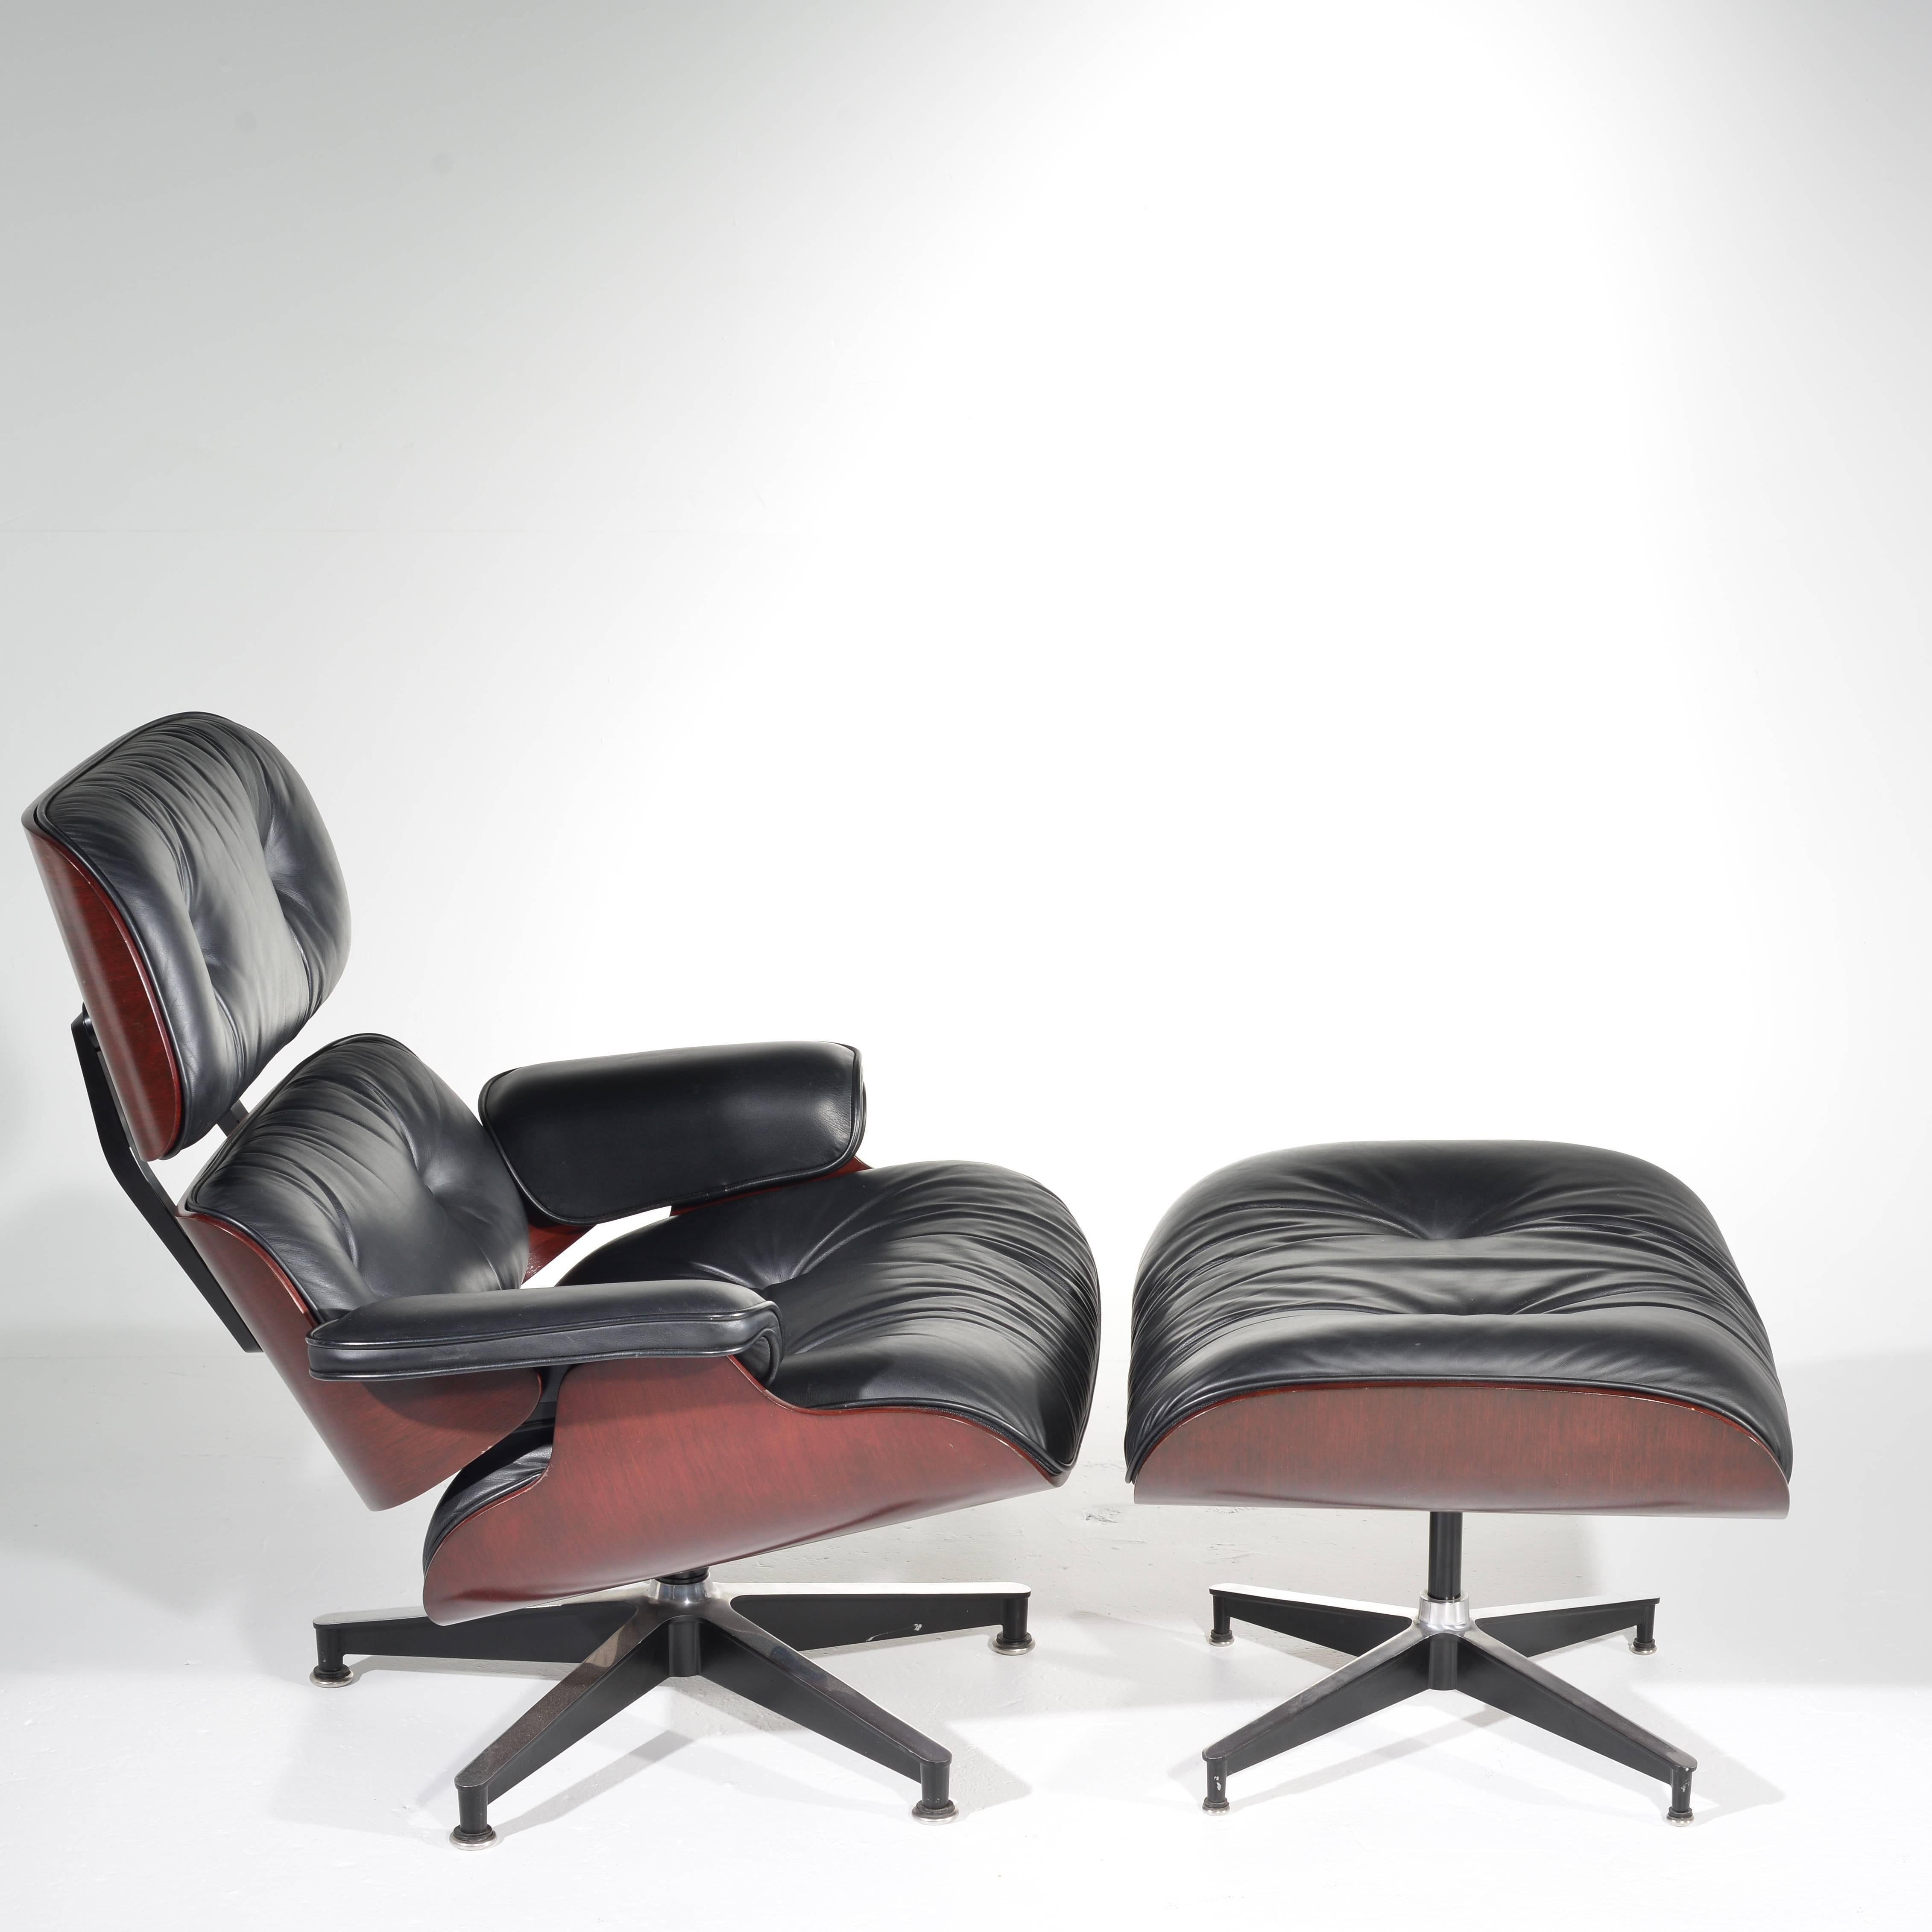 American Charles and Ray Eames Cherry and Leather 670 Lounge Chair and 671 Ottoman